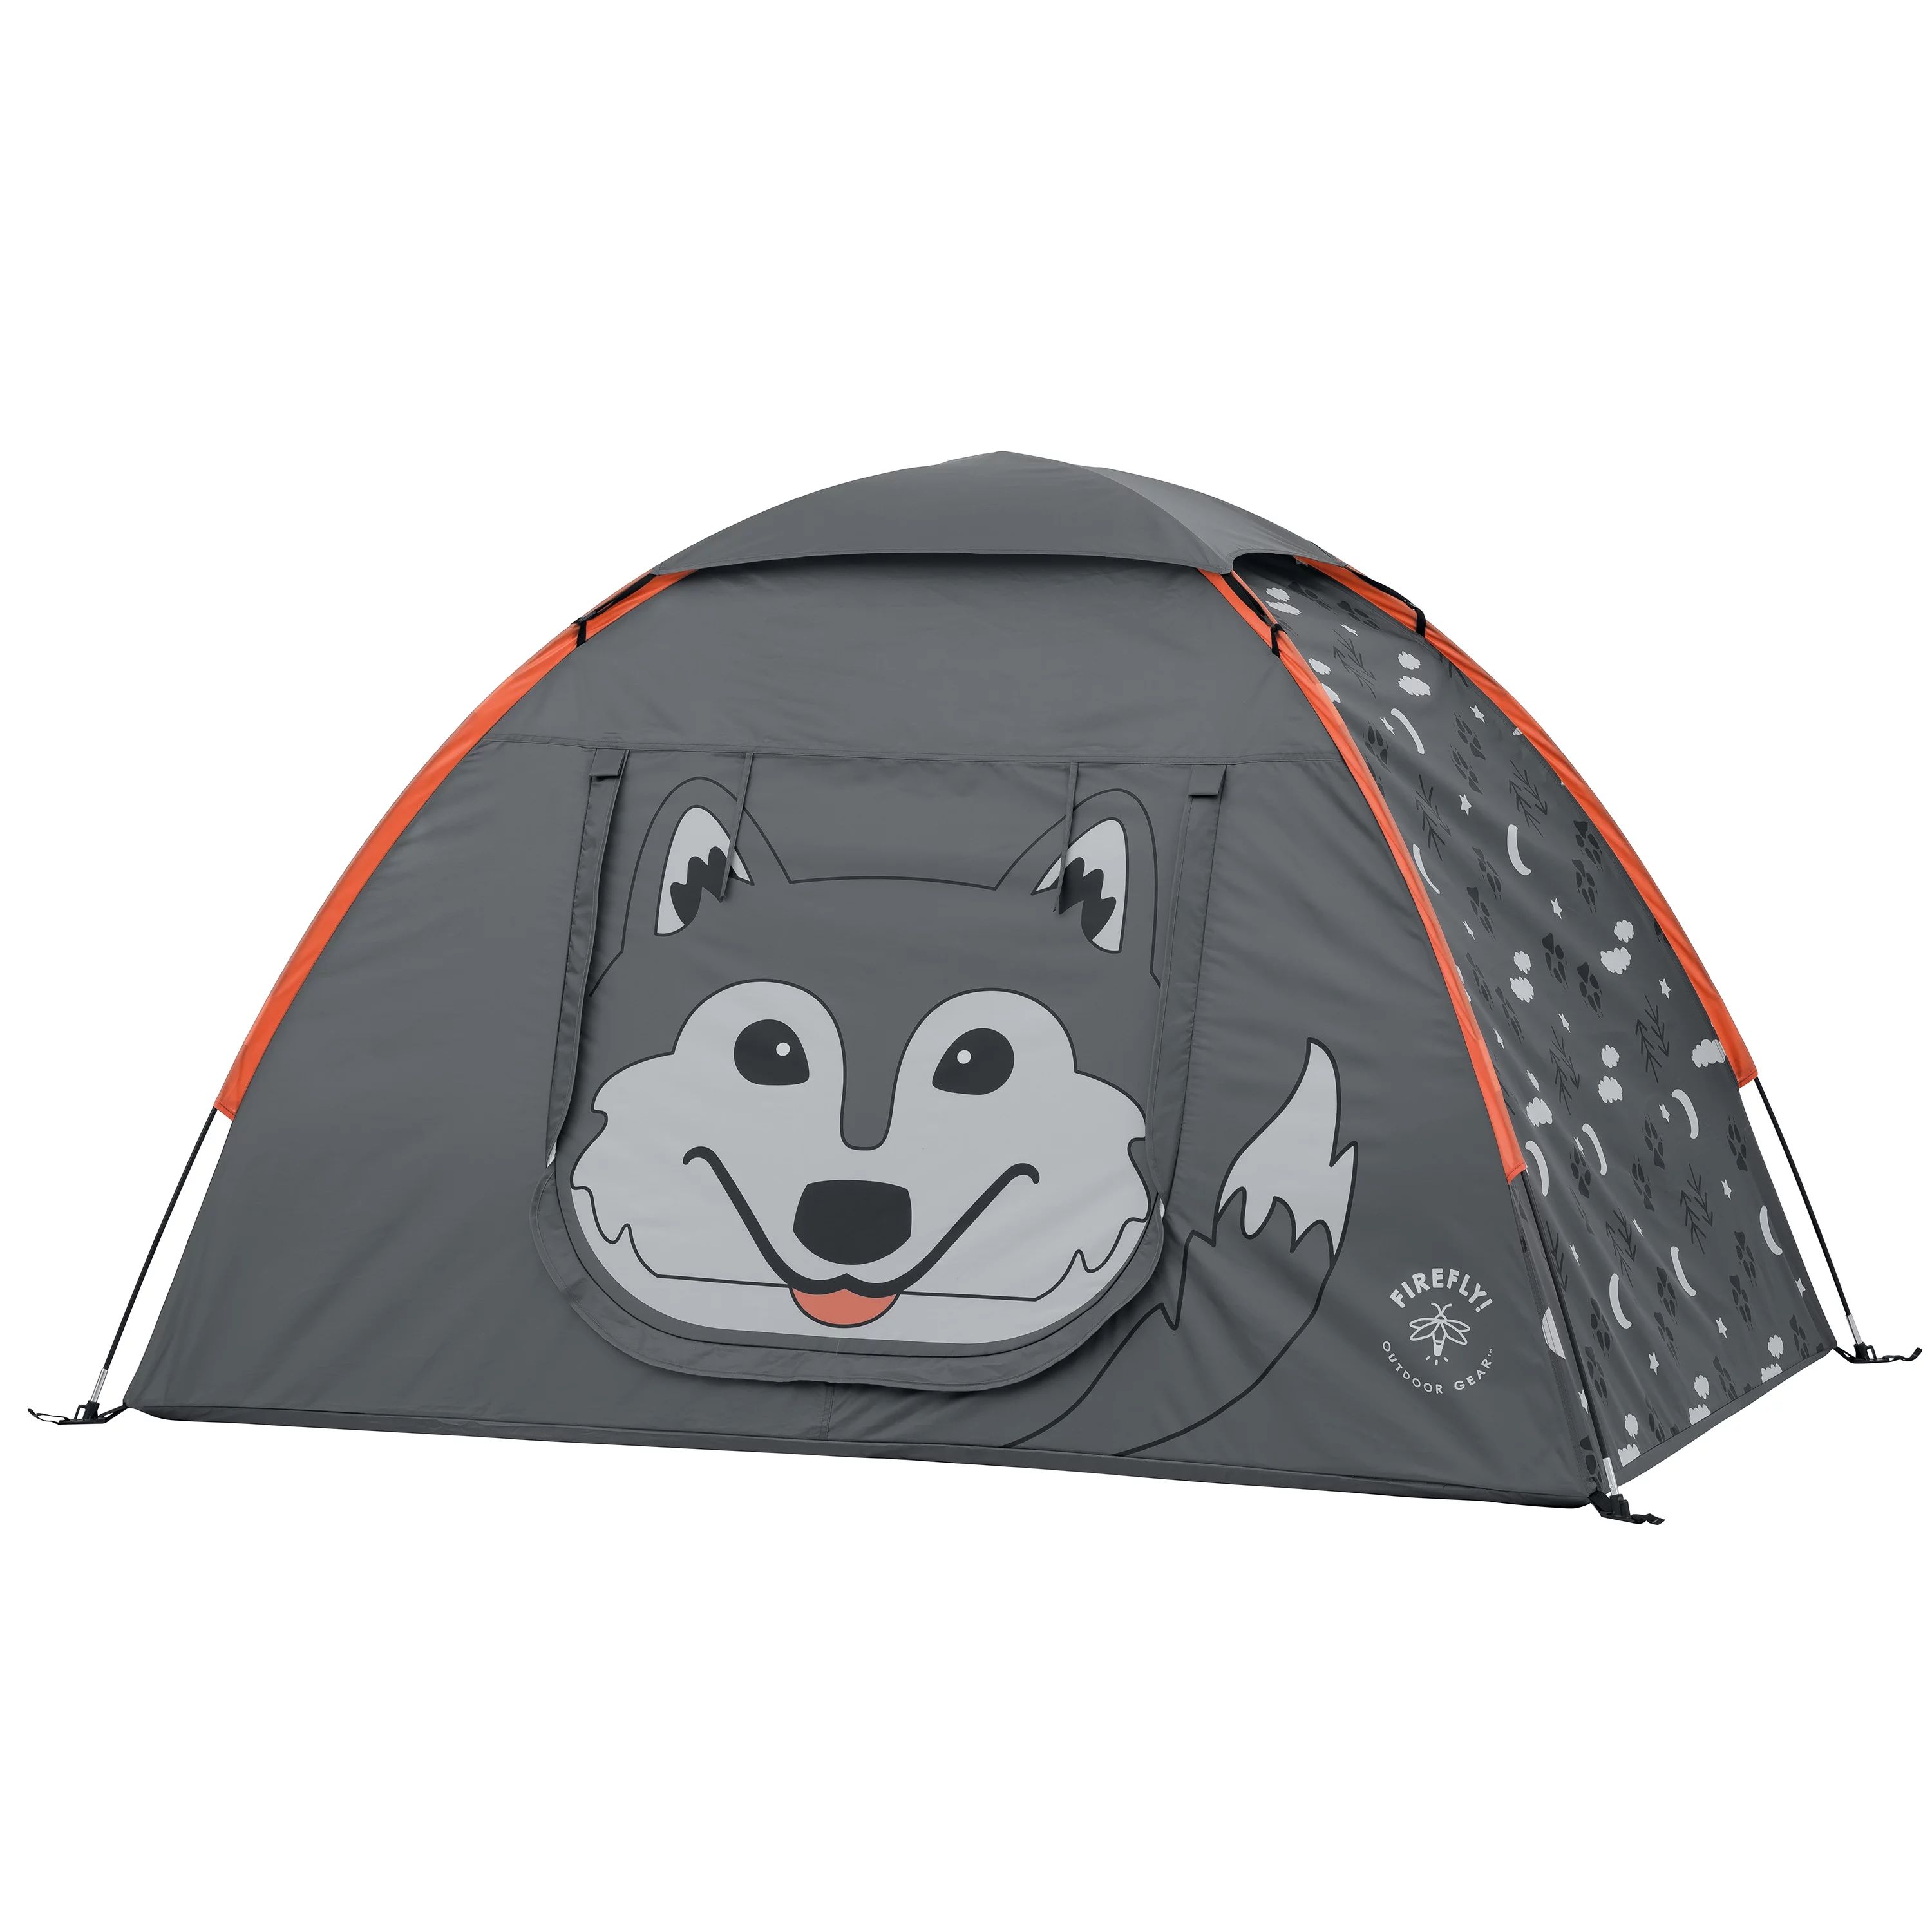 Firefly! Outdoor 72" x 48" x 44" Aspen the Wolf 2-Person Kid's Camping Tent | Walmart (US)